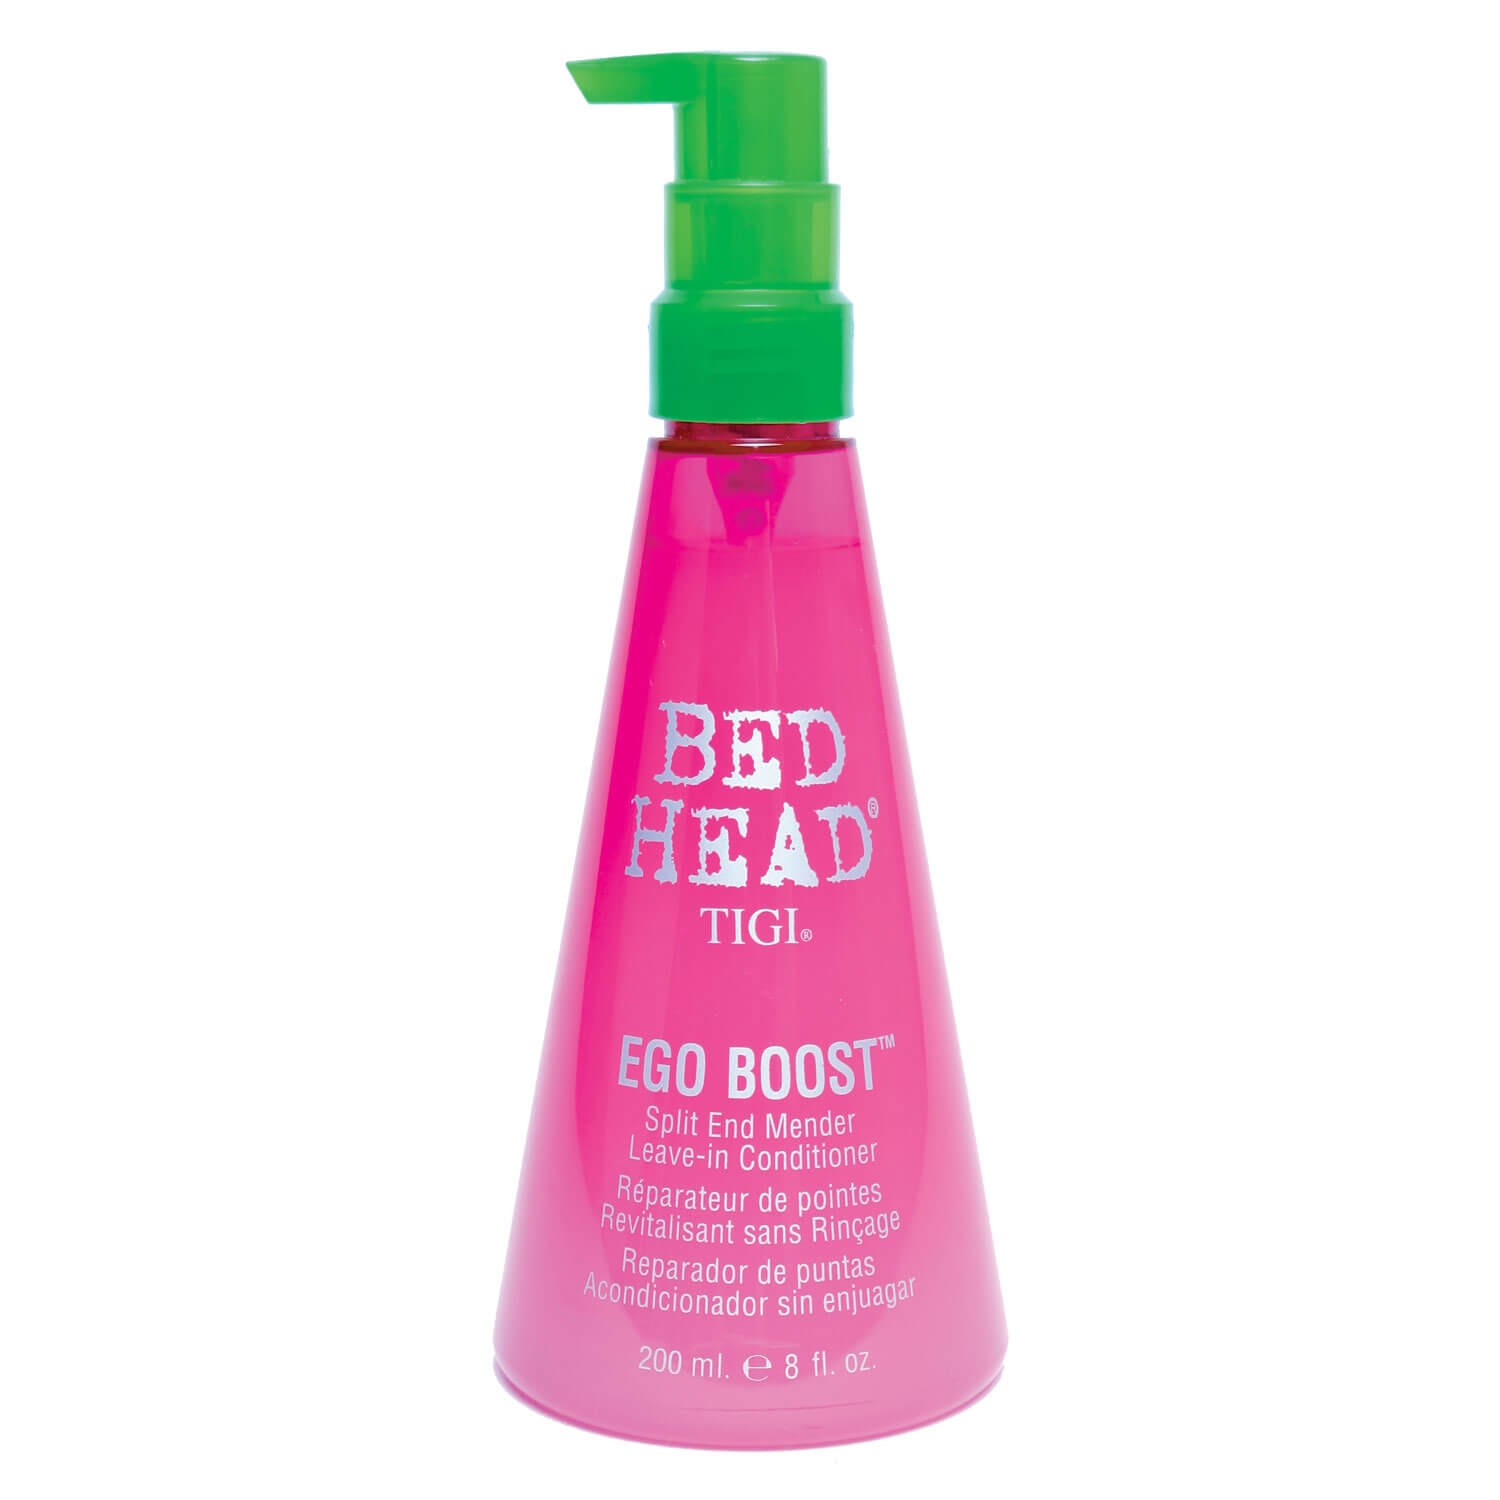 Product image from Bed Head - Ego Boost